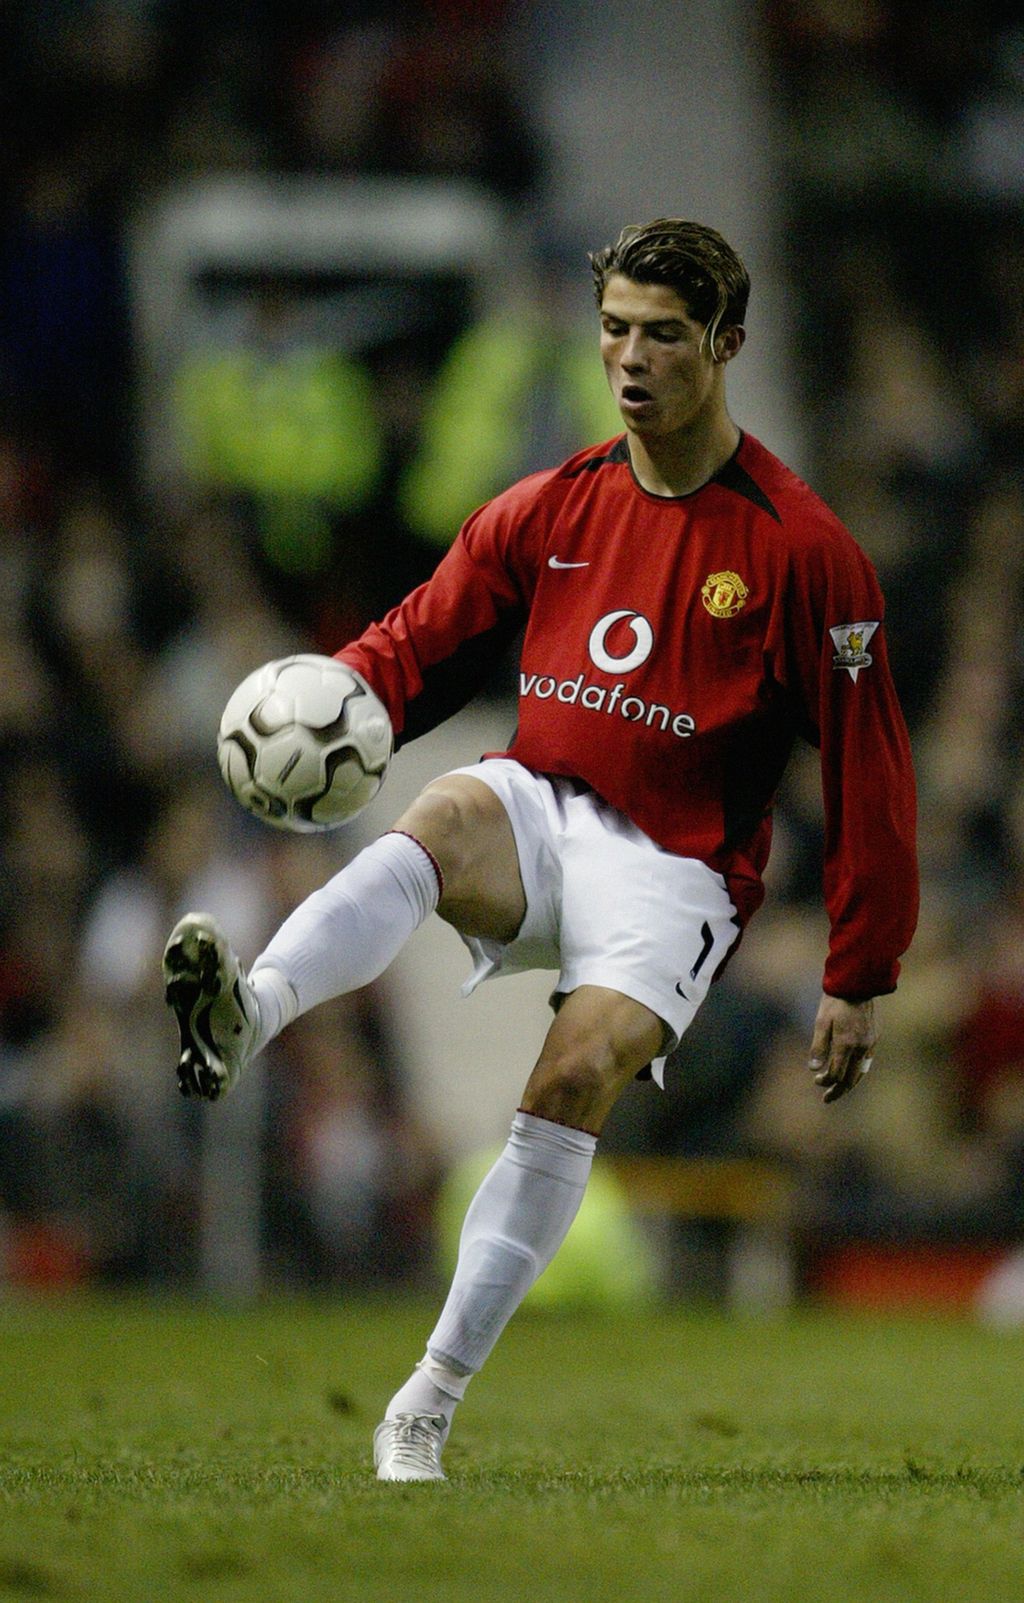 MANCHESTER - NOVEMBER 1:  Cristiano Ronaldo of Manchester United takes control of the ball during the FA Barclaycard Premiership match between Manchester United and Portsmouth on November 1, 2003 at Old Trafford in Manchester, England.  Manchester United won the match 3-0. (Photo by Alex Livesey/Getty Images)